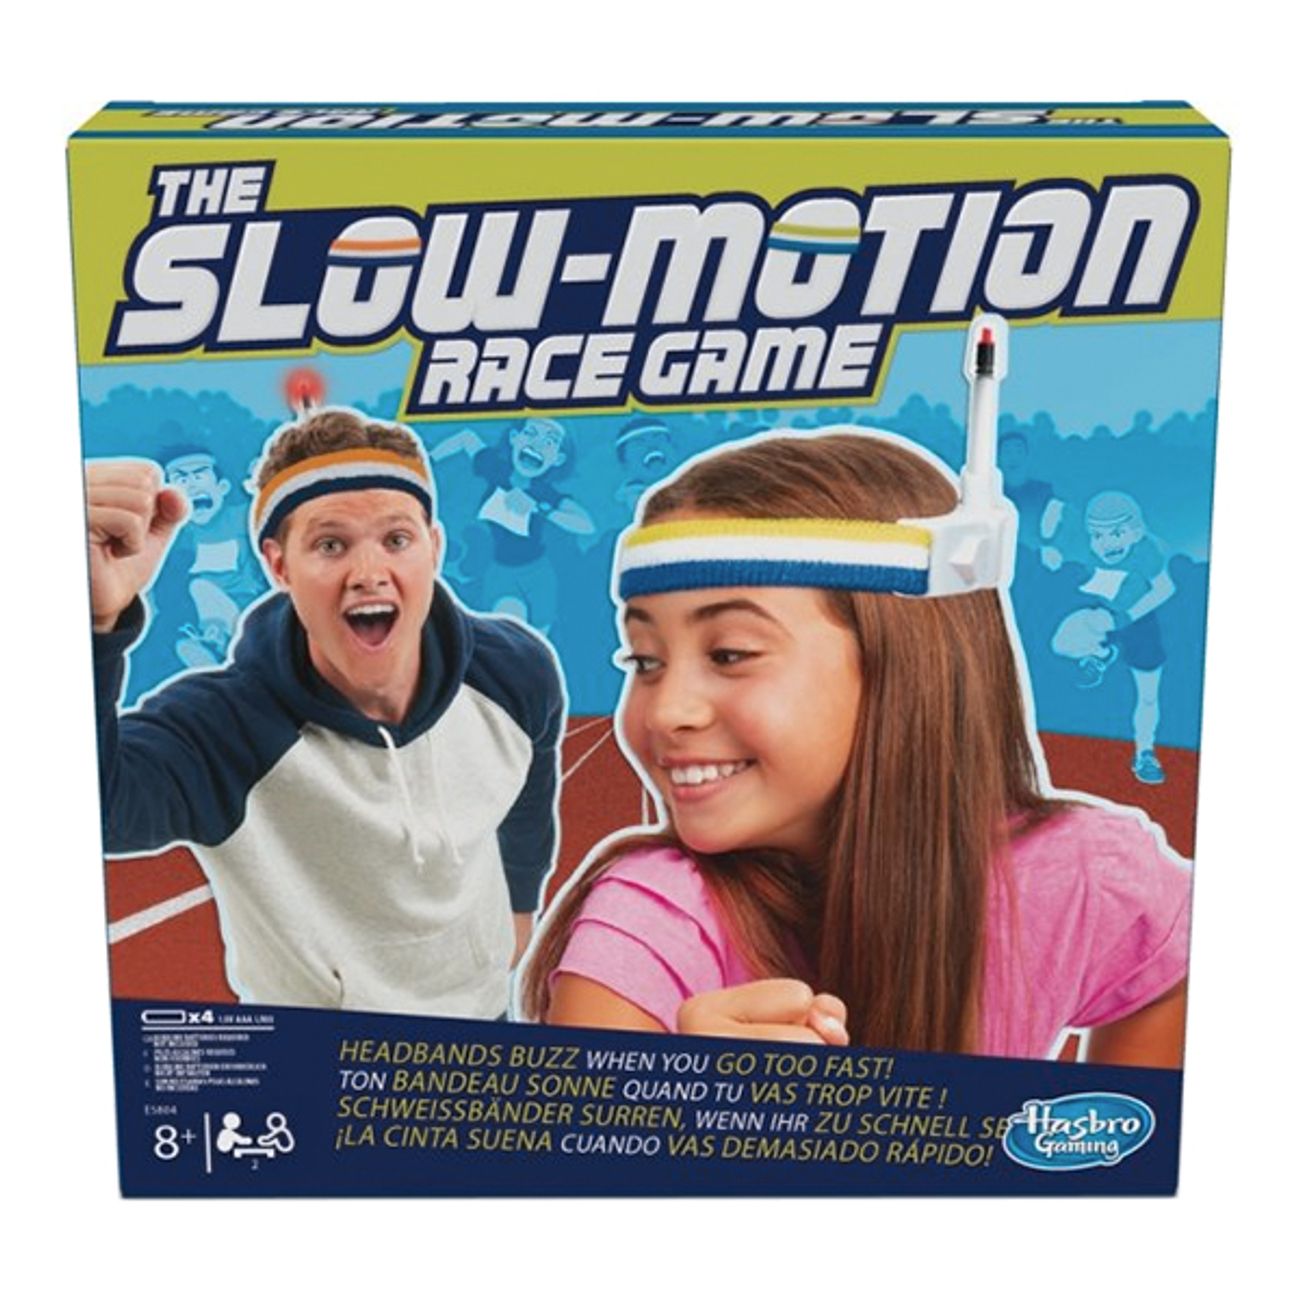 the-slow-motion-race-game-1